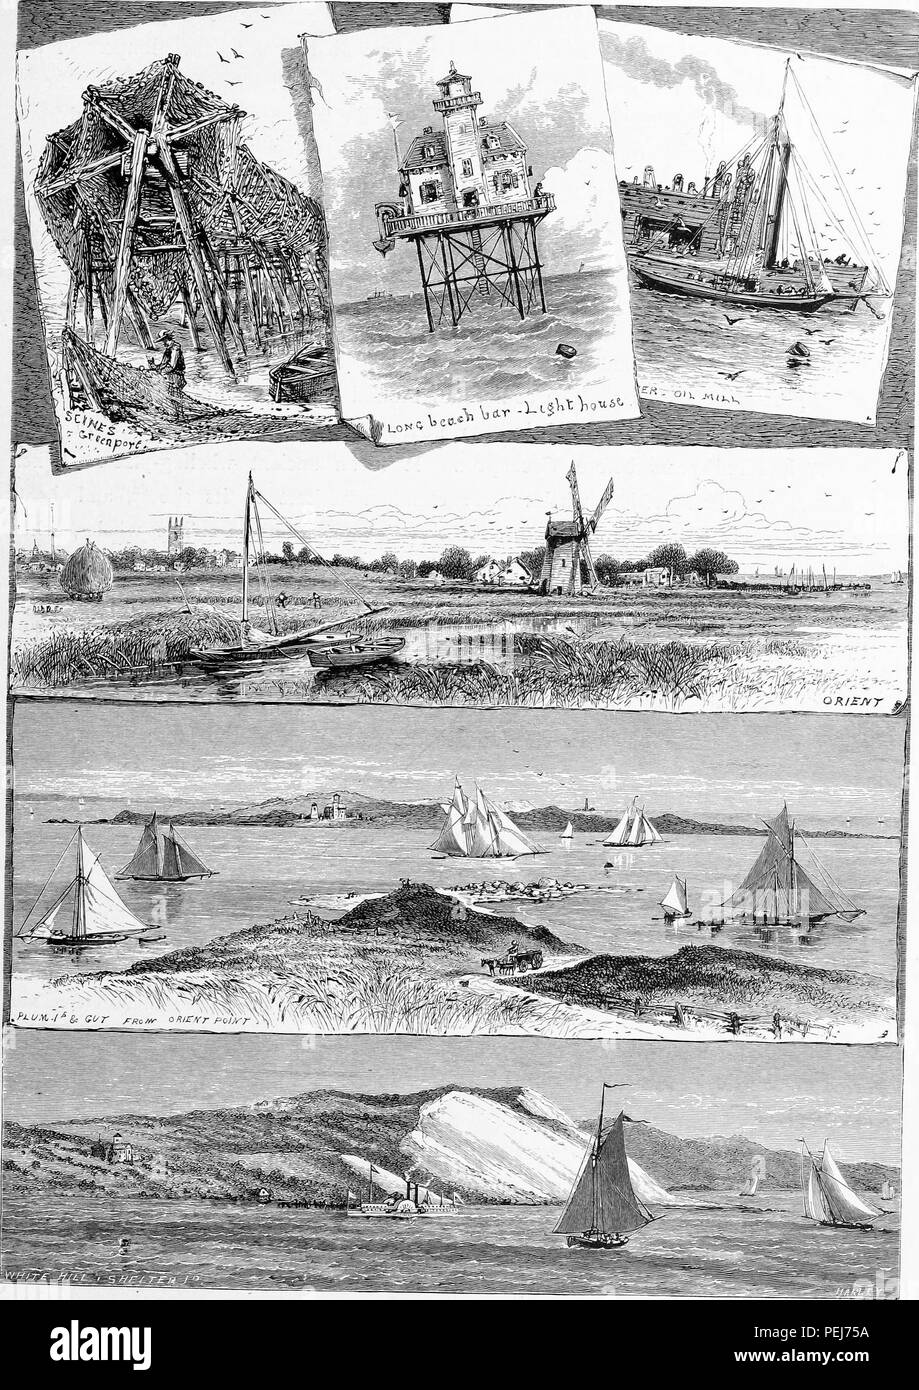 Black and white vintage print depicting scenes in four registers of the East End of Long Island, New York, USA, including (from top left to right) fishing apparatus on the beach at Greenport, the Long Beach Bar Lighthouse, and several vessels docked next to an Oil Mill, the lower registers (top to bottom) depict the town of Orient, a view from Orient Point, and the White Hill Shelter, published in William Cullen Bryant's edited volume 'Picturesque America; or, The Land We Live In', 1872. Courtesy Internet Archive. () Stock Photo